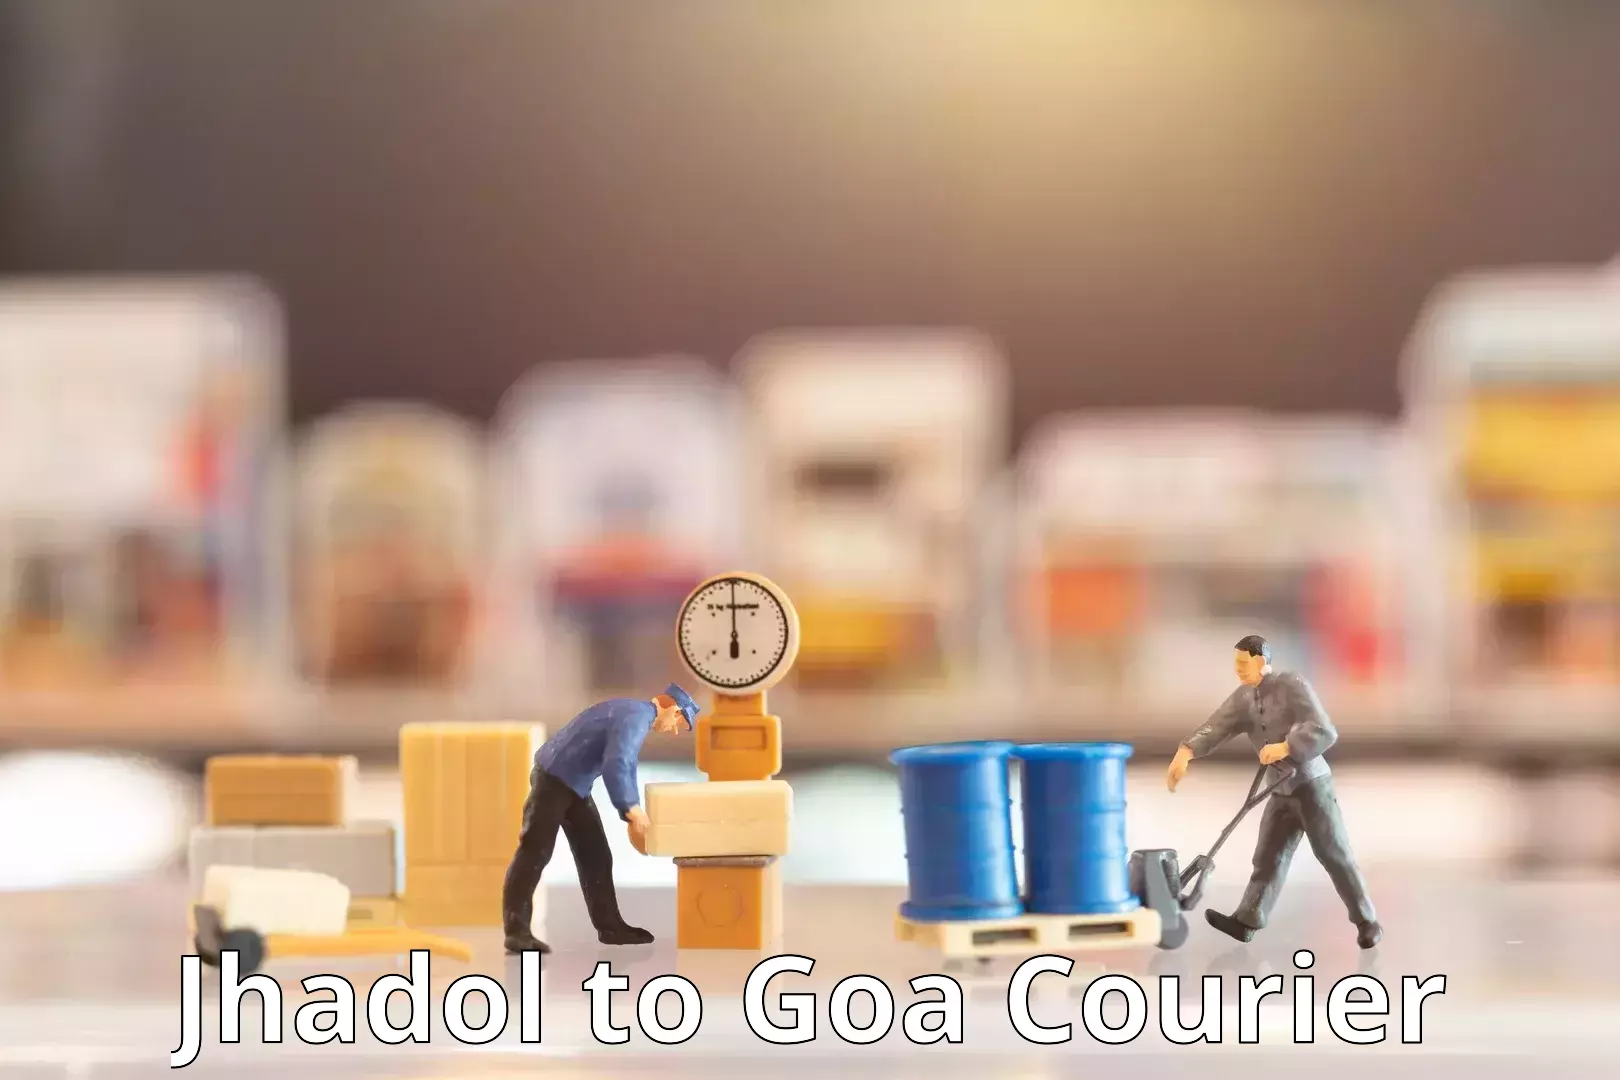 Reliable delivery network Jhadol to Goa